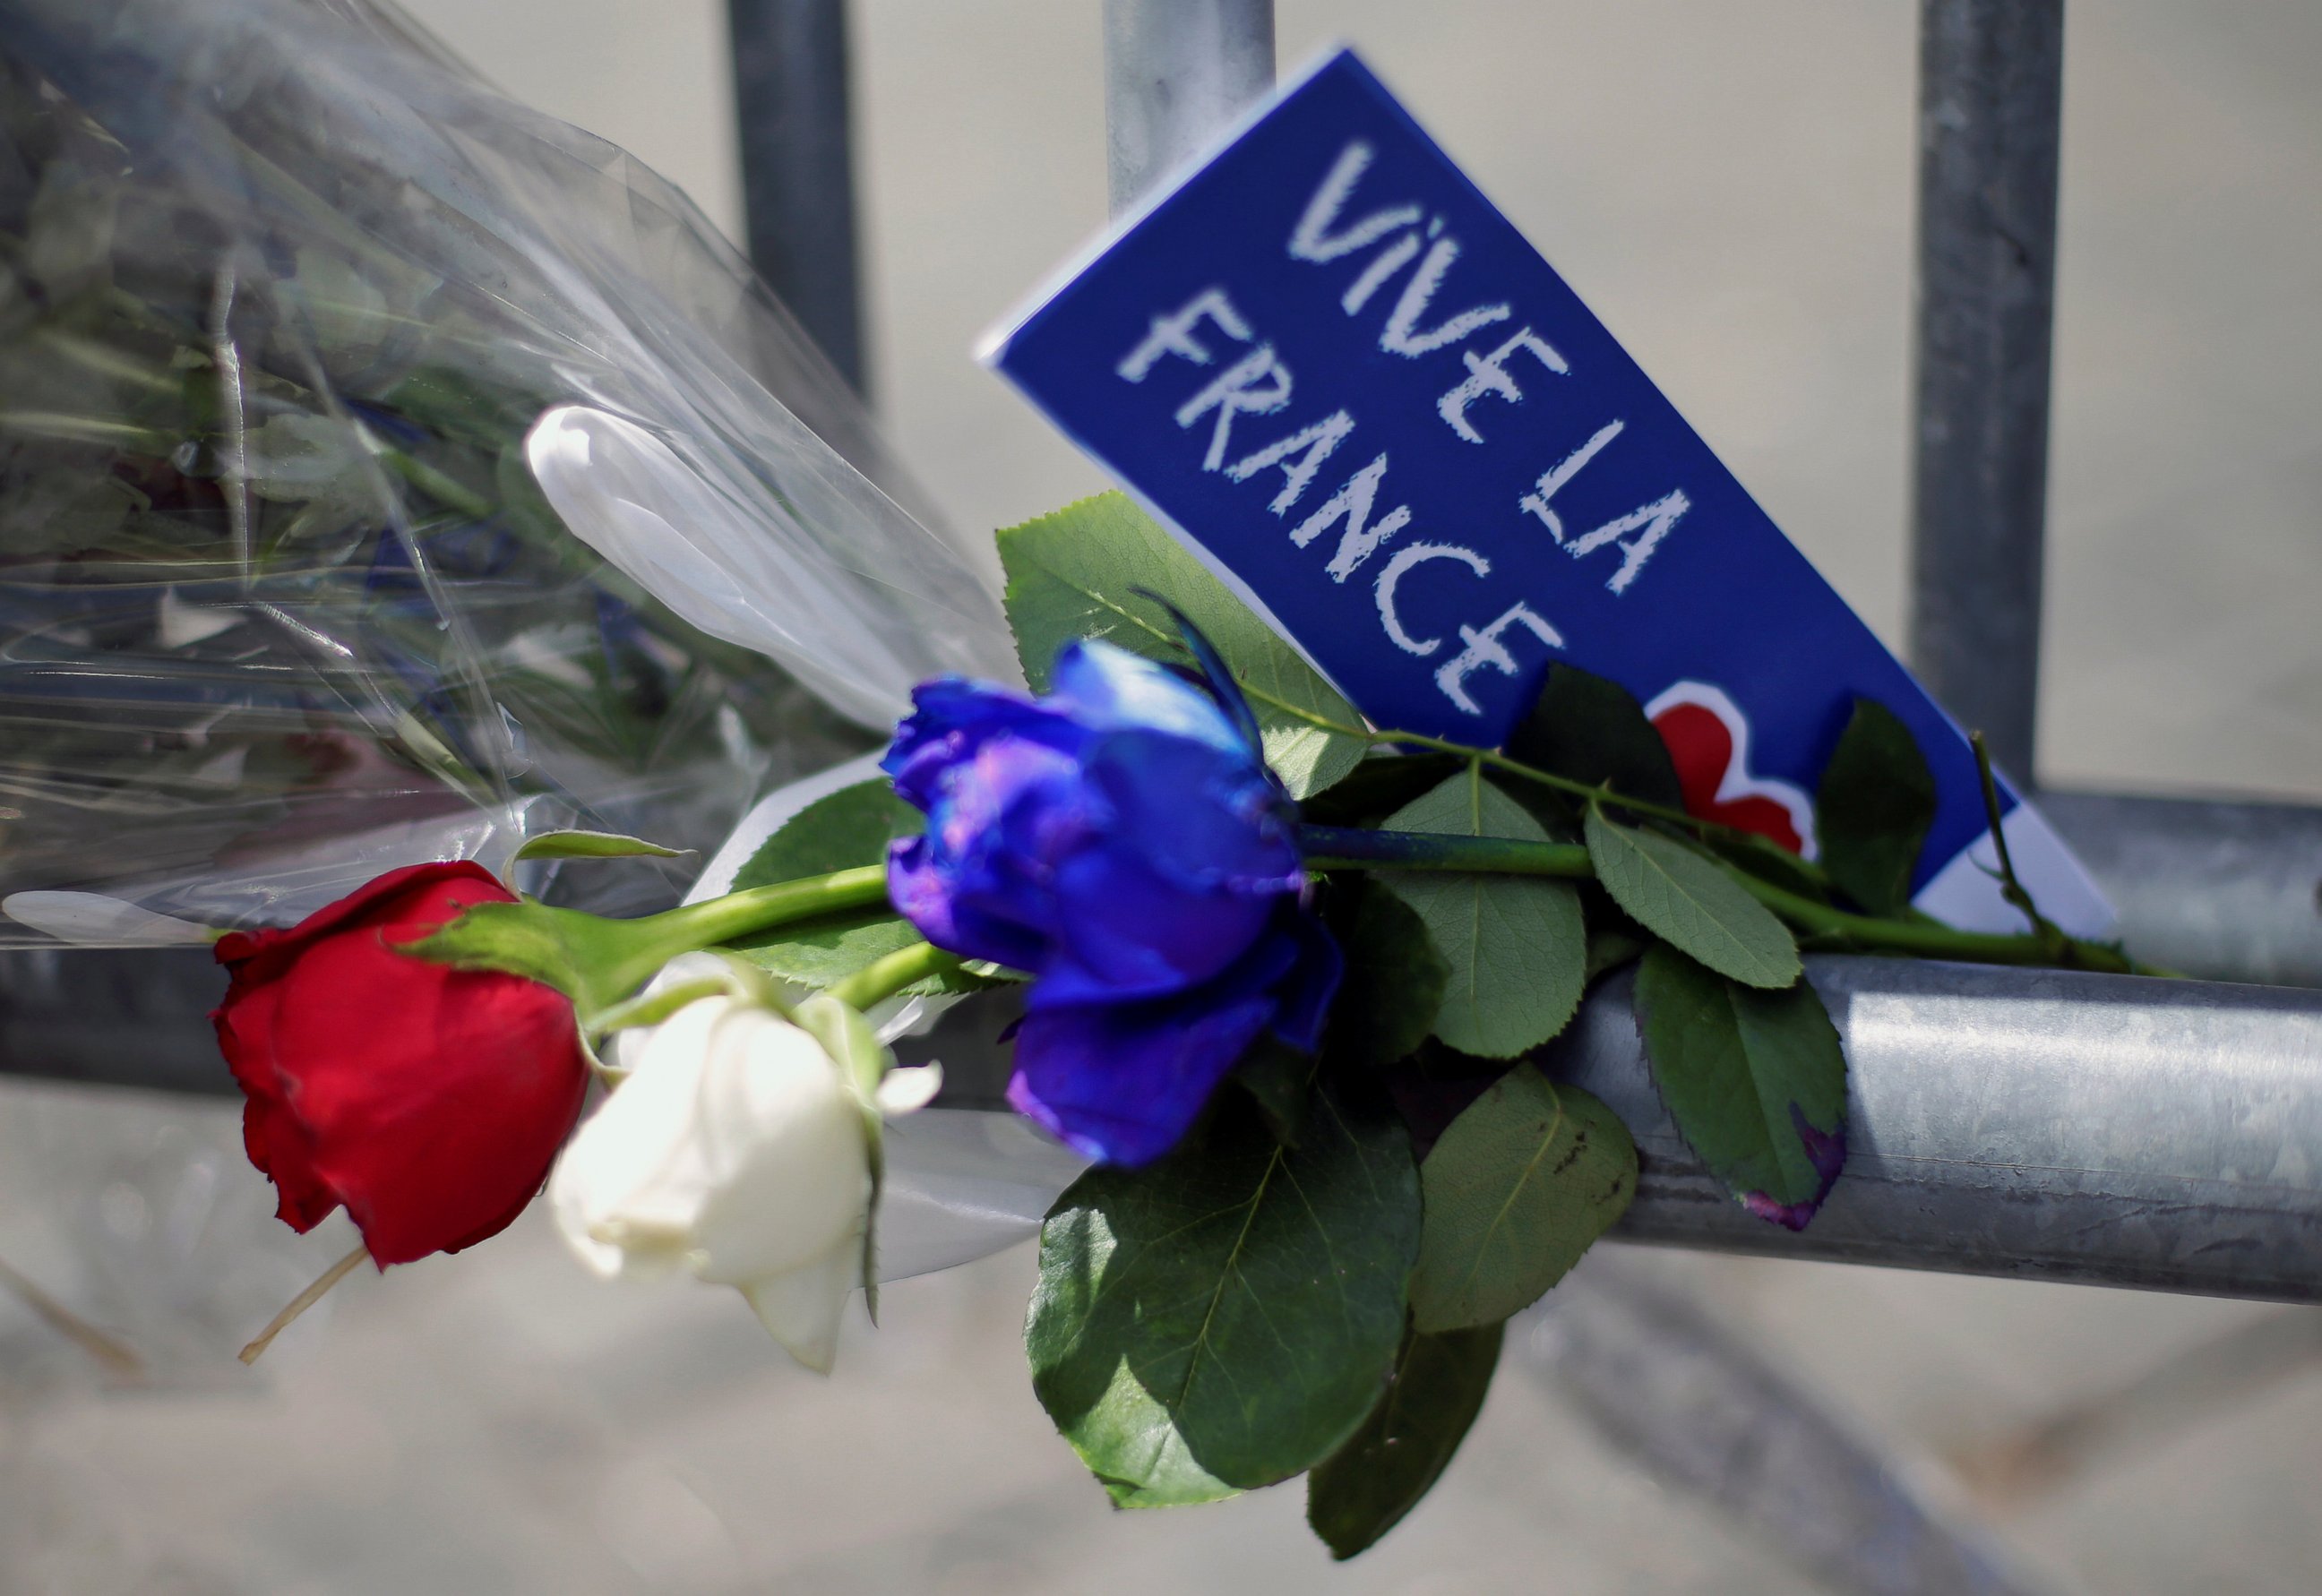 PHOTO: Flowers are seen attached to a fence to remember the victims of the Bastille Day truck attack in Nice in front of the French embassy in Rome, July 15, 2016.